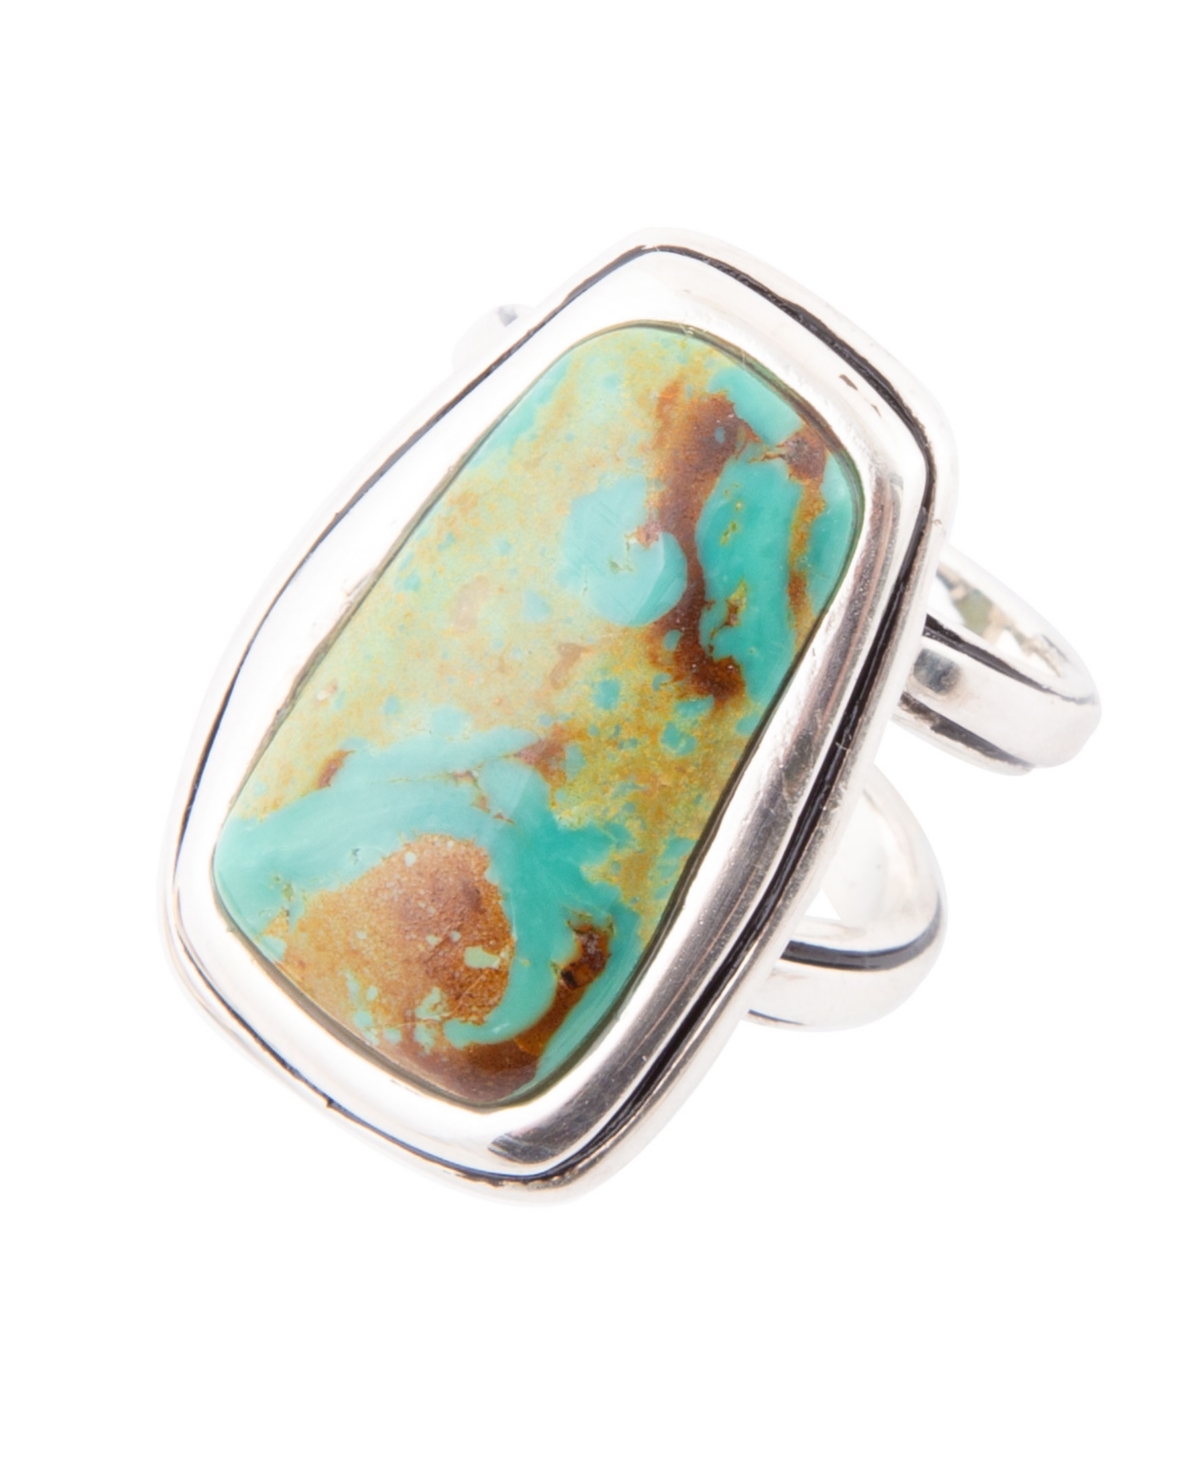 Precious Genuine Turquoise Sterling Silver Rectangle Ring - Genuine turquoise